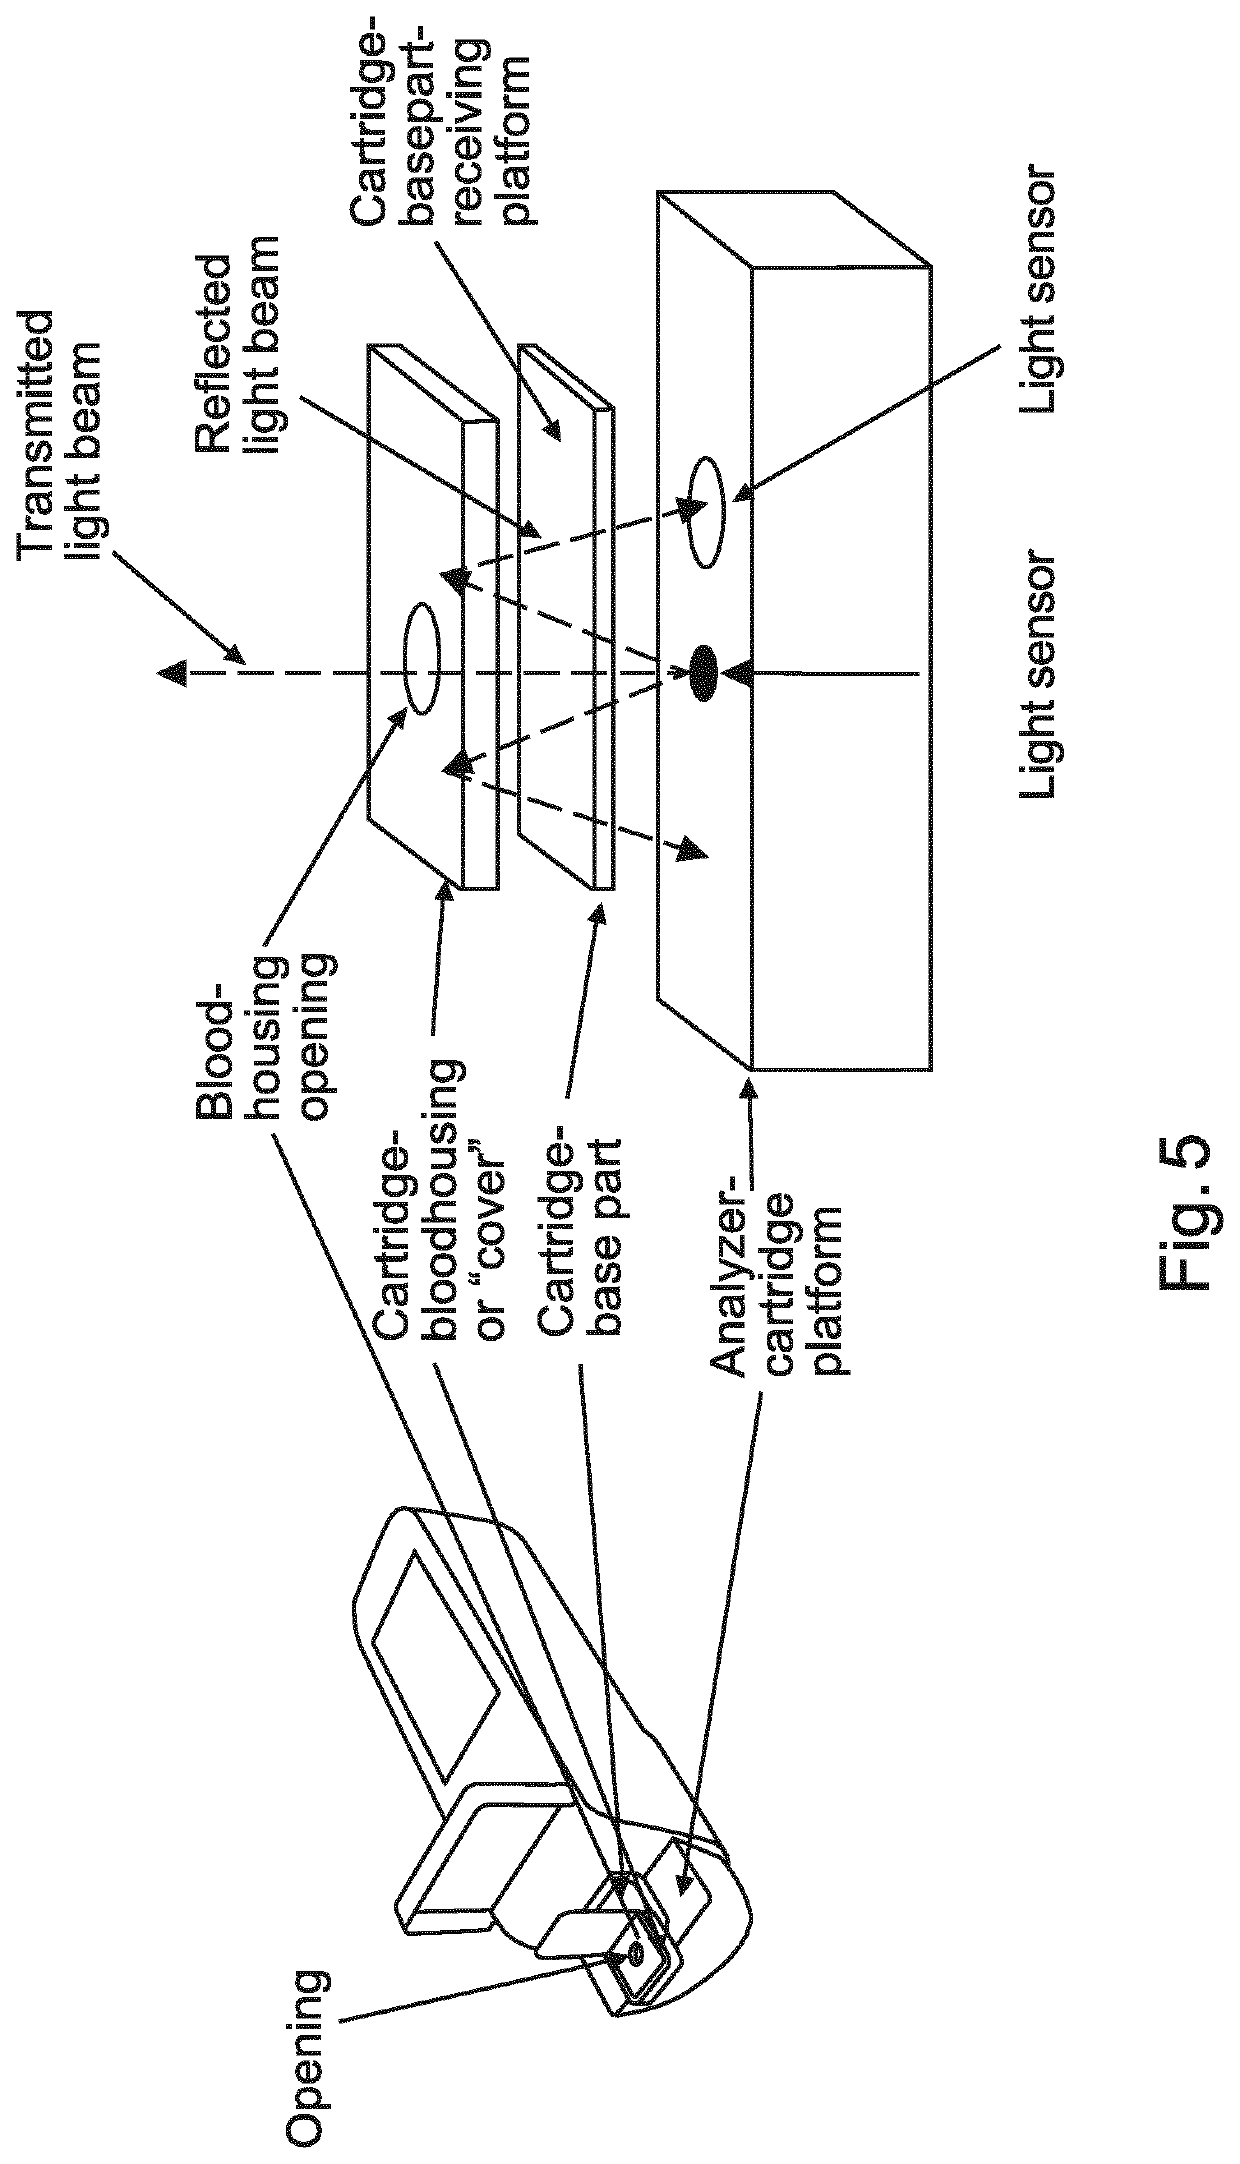 Device for use in fluid sample analysis